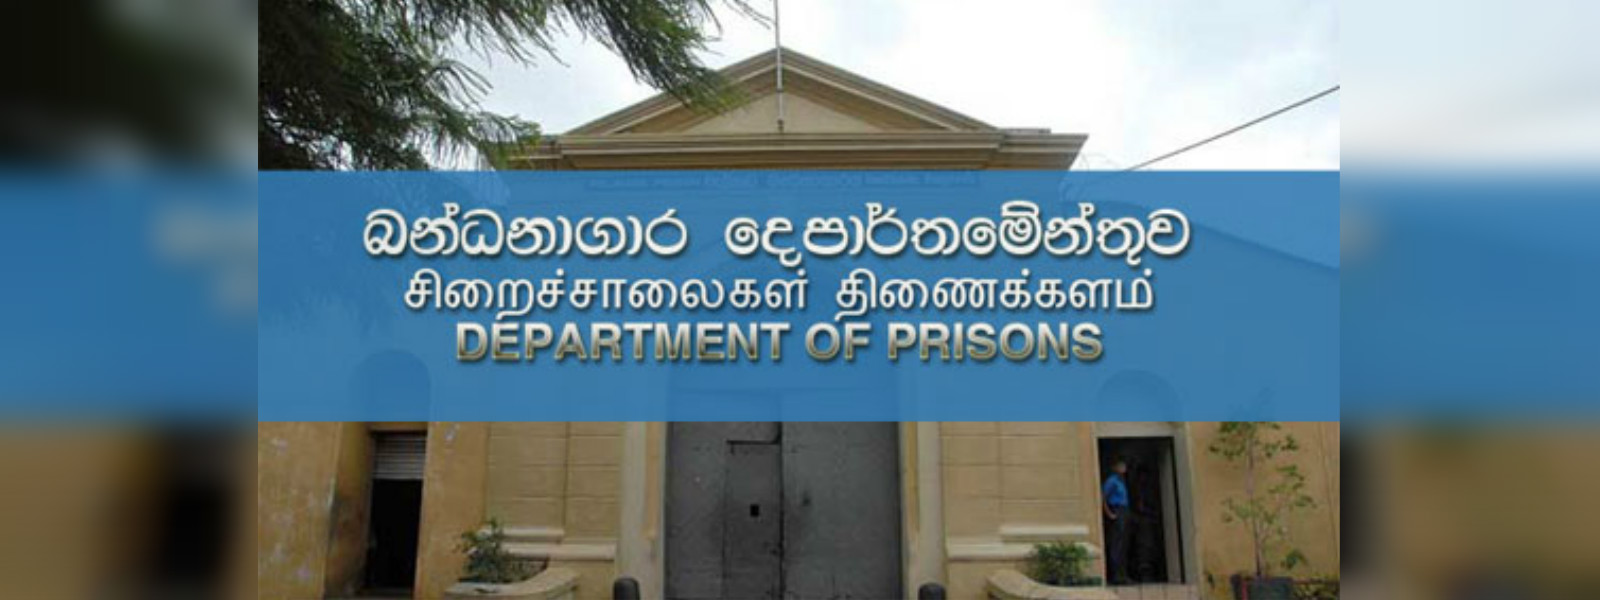 Negombo Prison Officer interdicted for attempting to smuggle SIM to an inmate